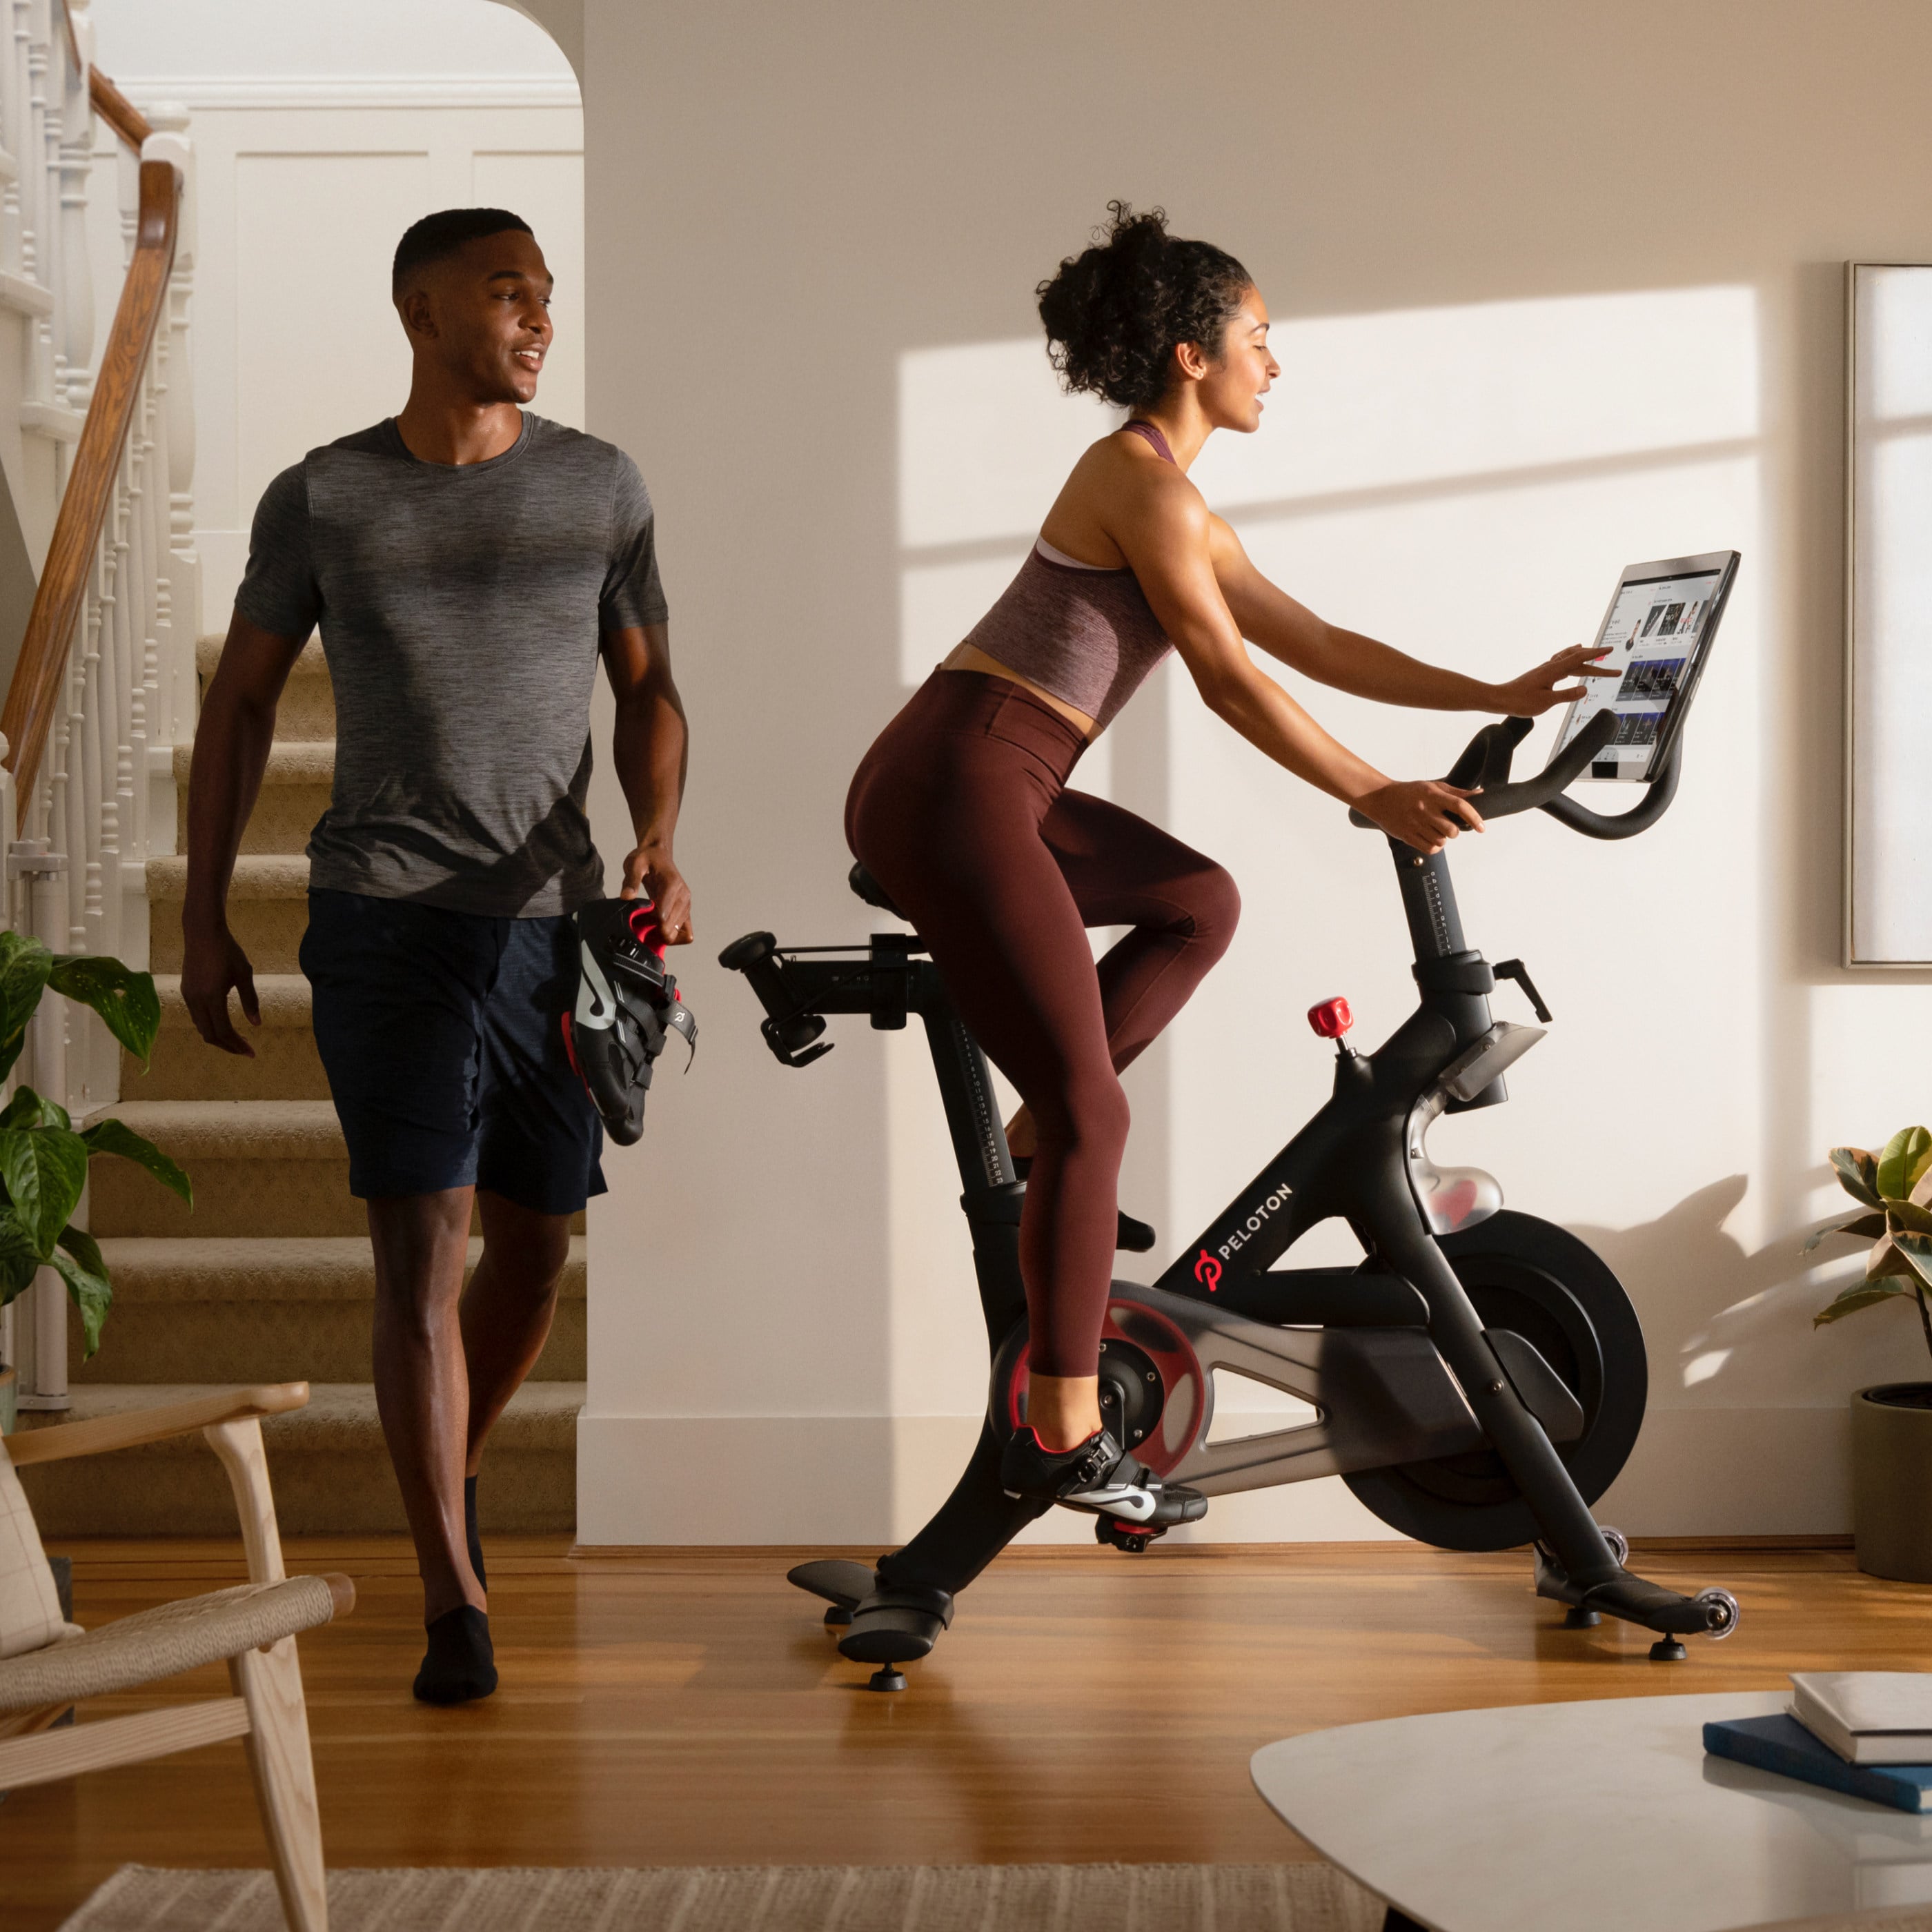 How to Get a Peloton-Style Workout Without Splurging - The New York Times